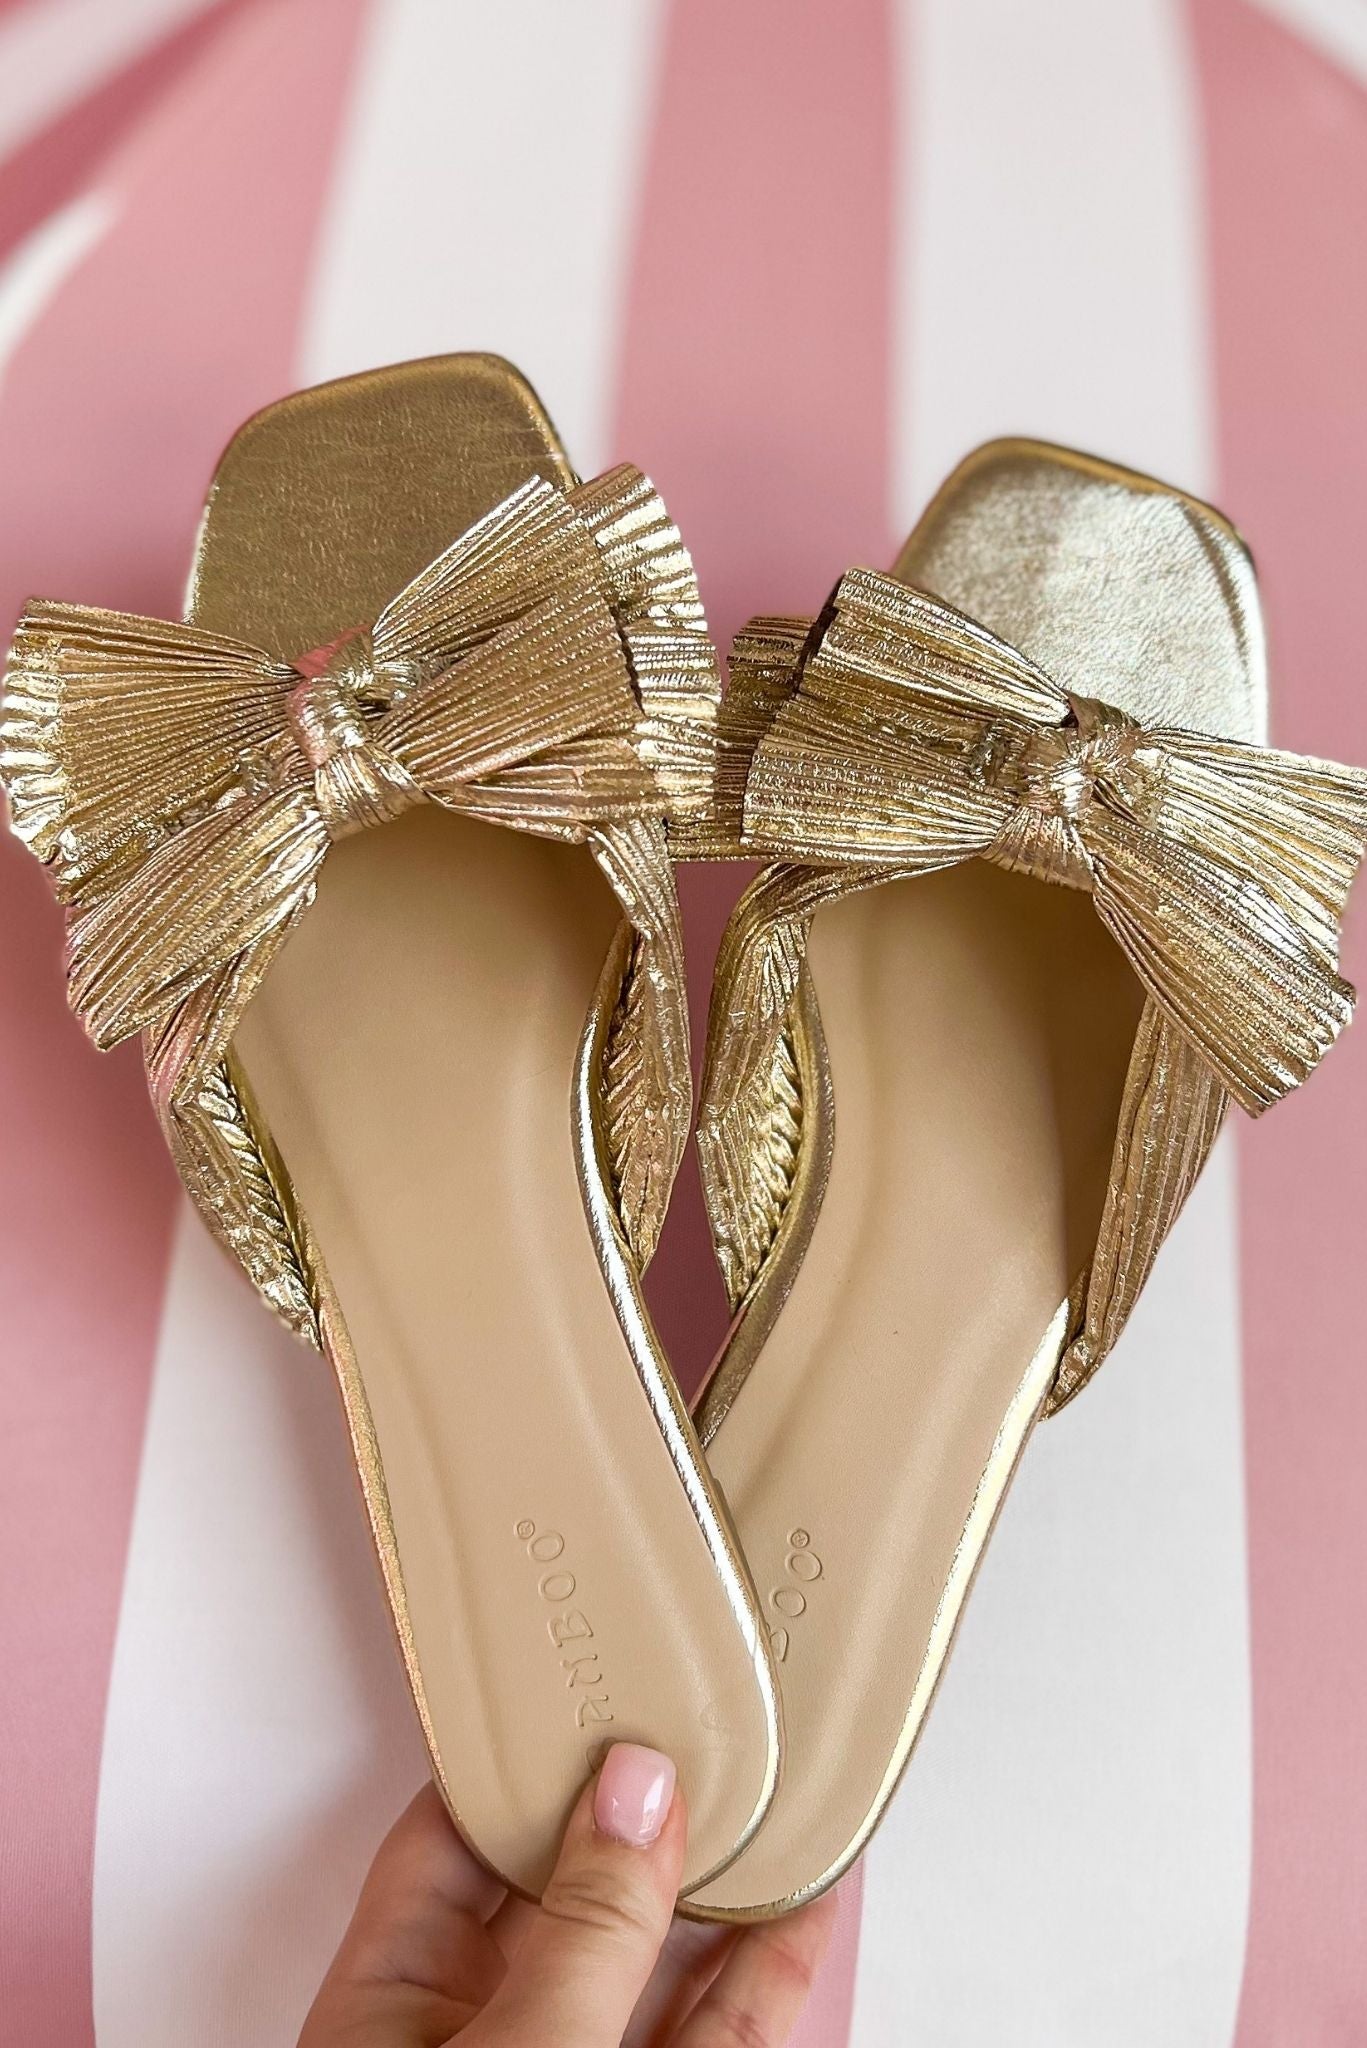 Gold Metallic Bow Sandal Slides, spring break, resort wear, summer sandal, must have, shop style your senses by mallory fitzsimmons